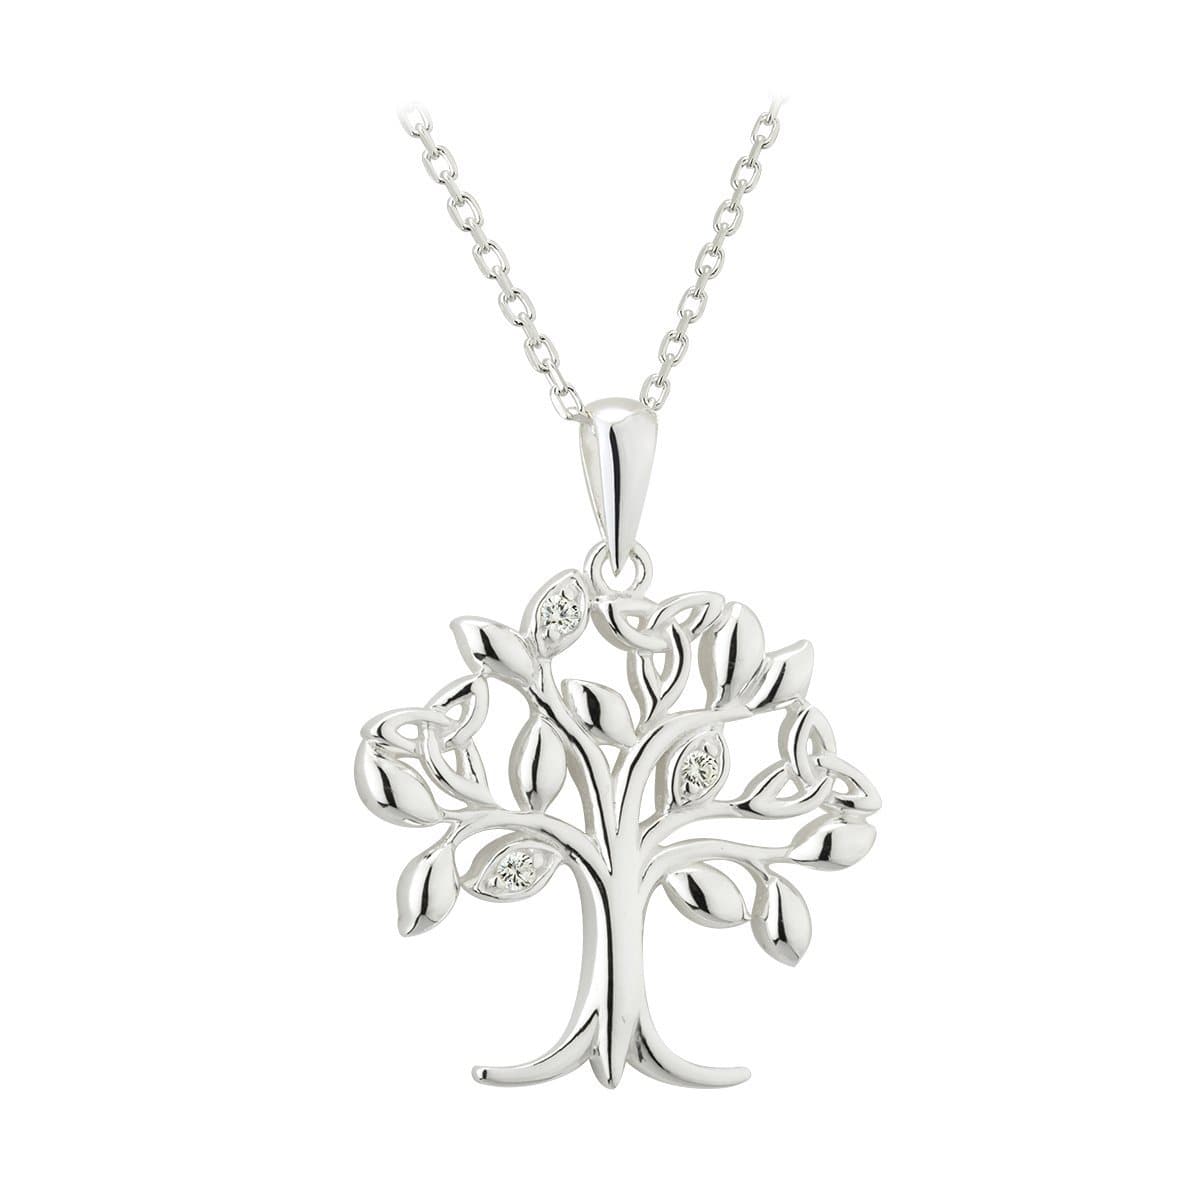 Irish Crystal Tree of Life Sterling Silver Trinity Knots by Our Maker-Partner in Co. Dublin